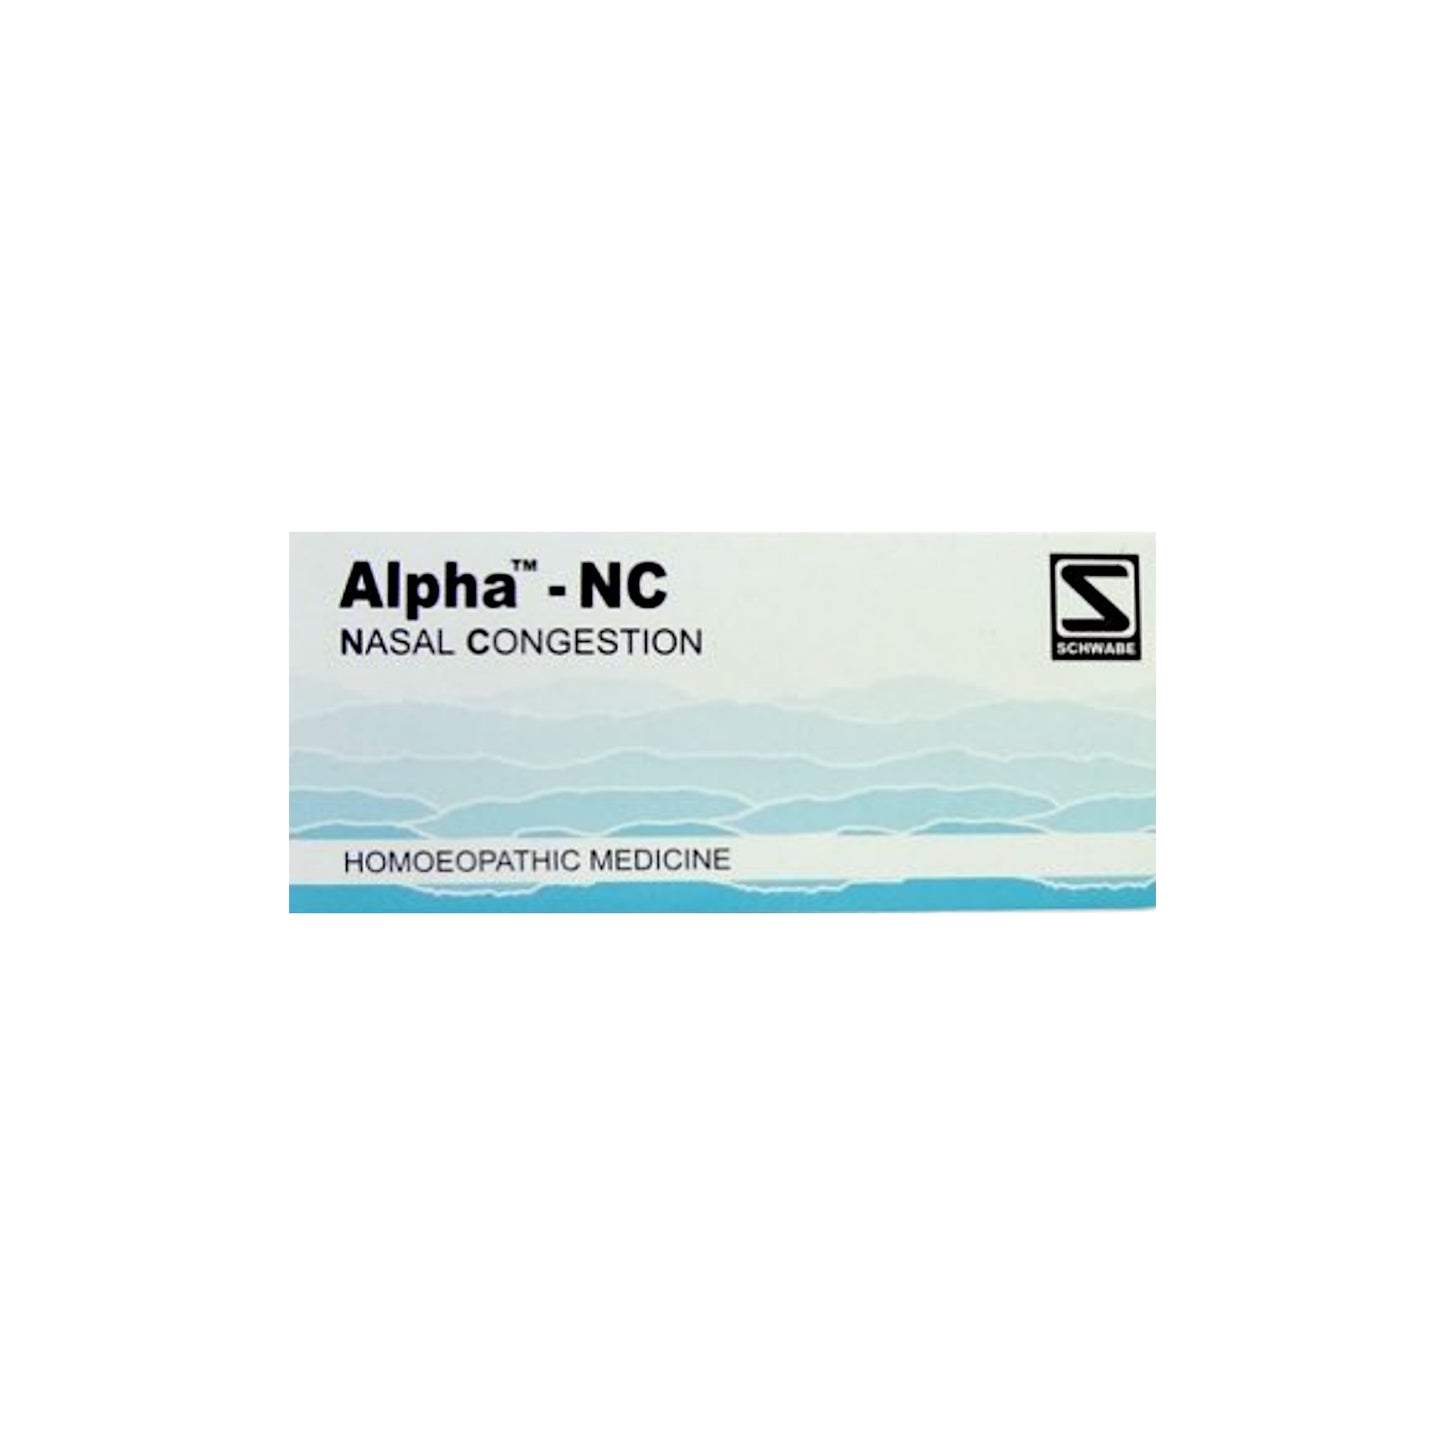 Dr. Schwabe Homeopathy - Alpha-NC 40 Tablets